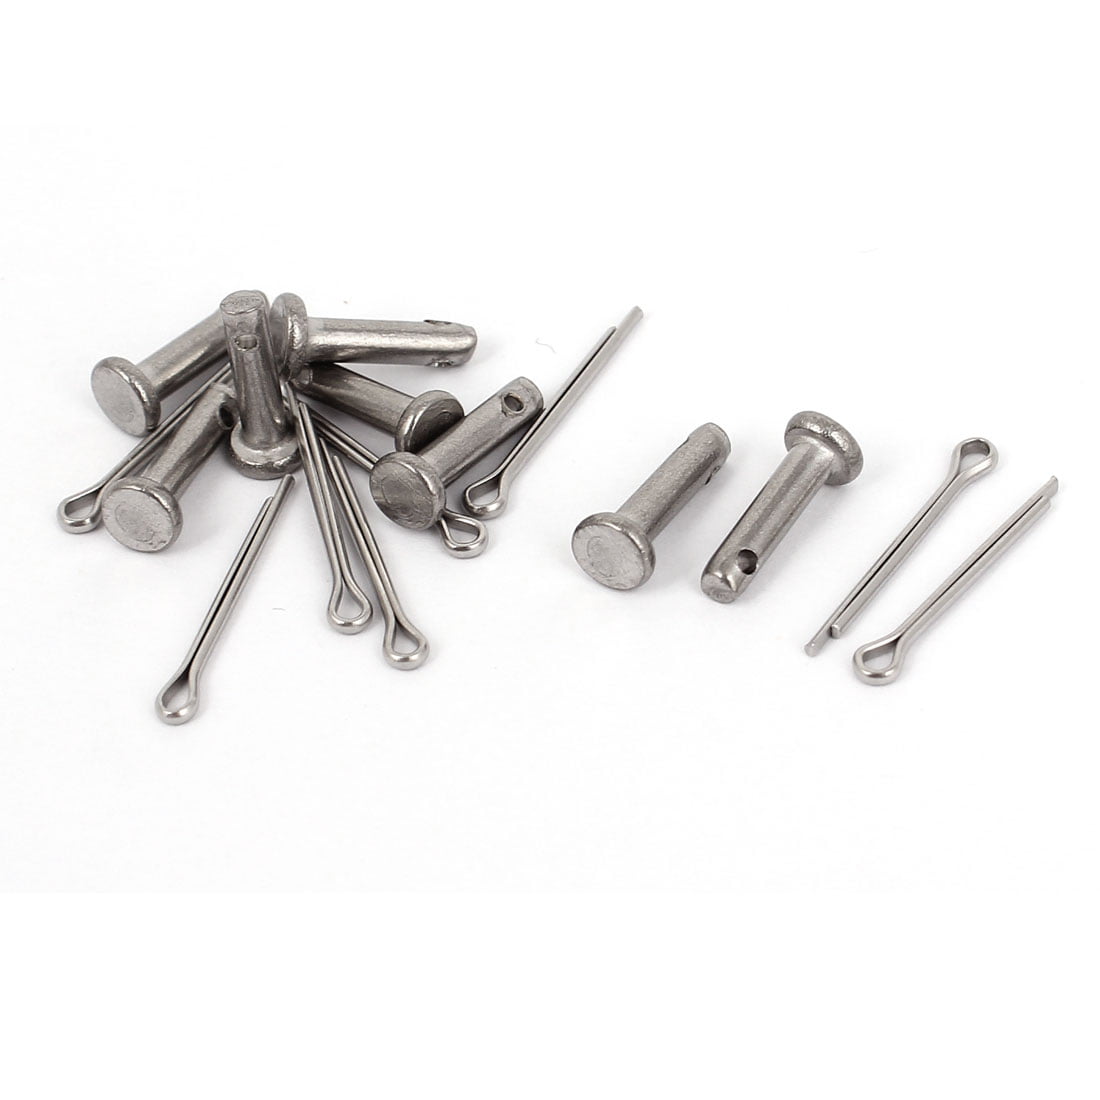 M6 M8 M10 304 Stainless Steel Flat head Cotter-Pins Clevis Pins with Head 